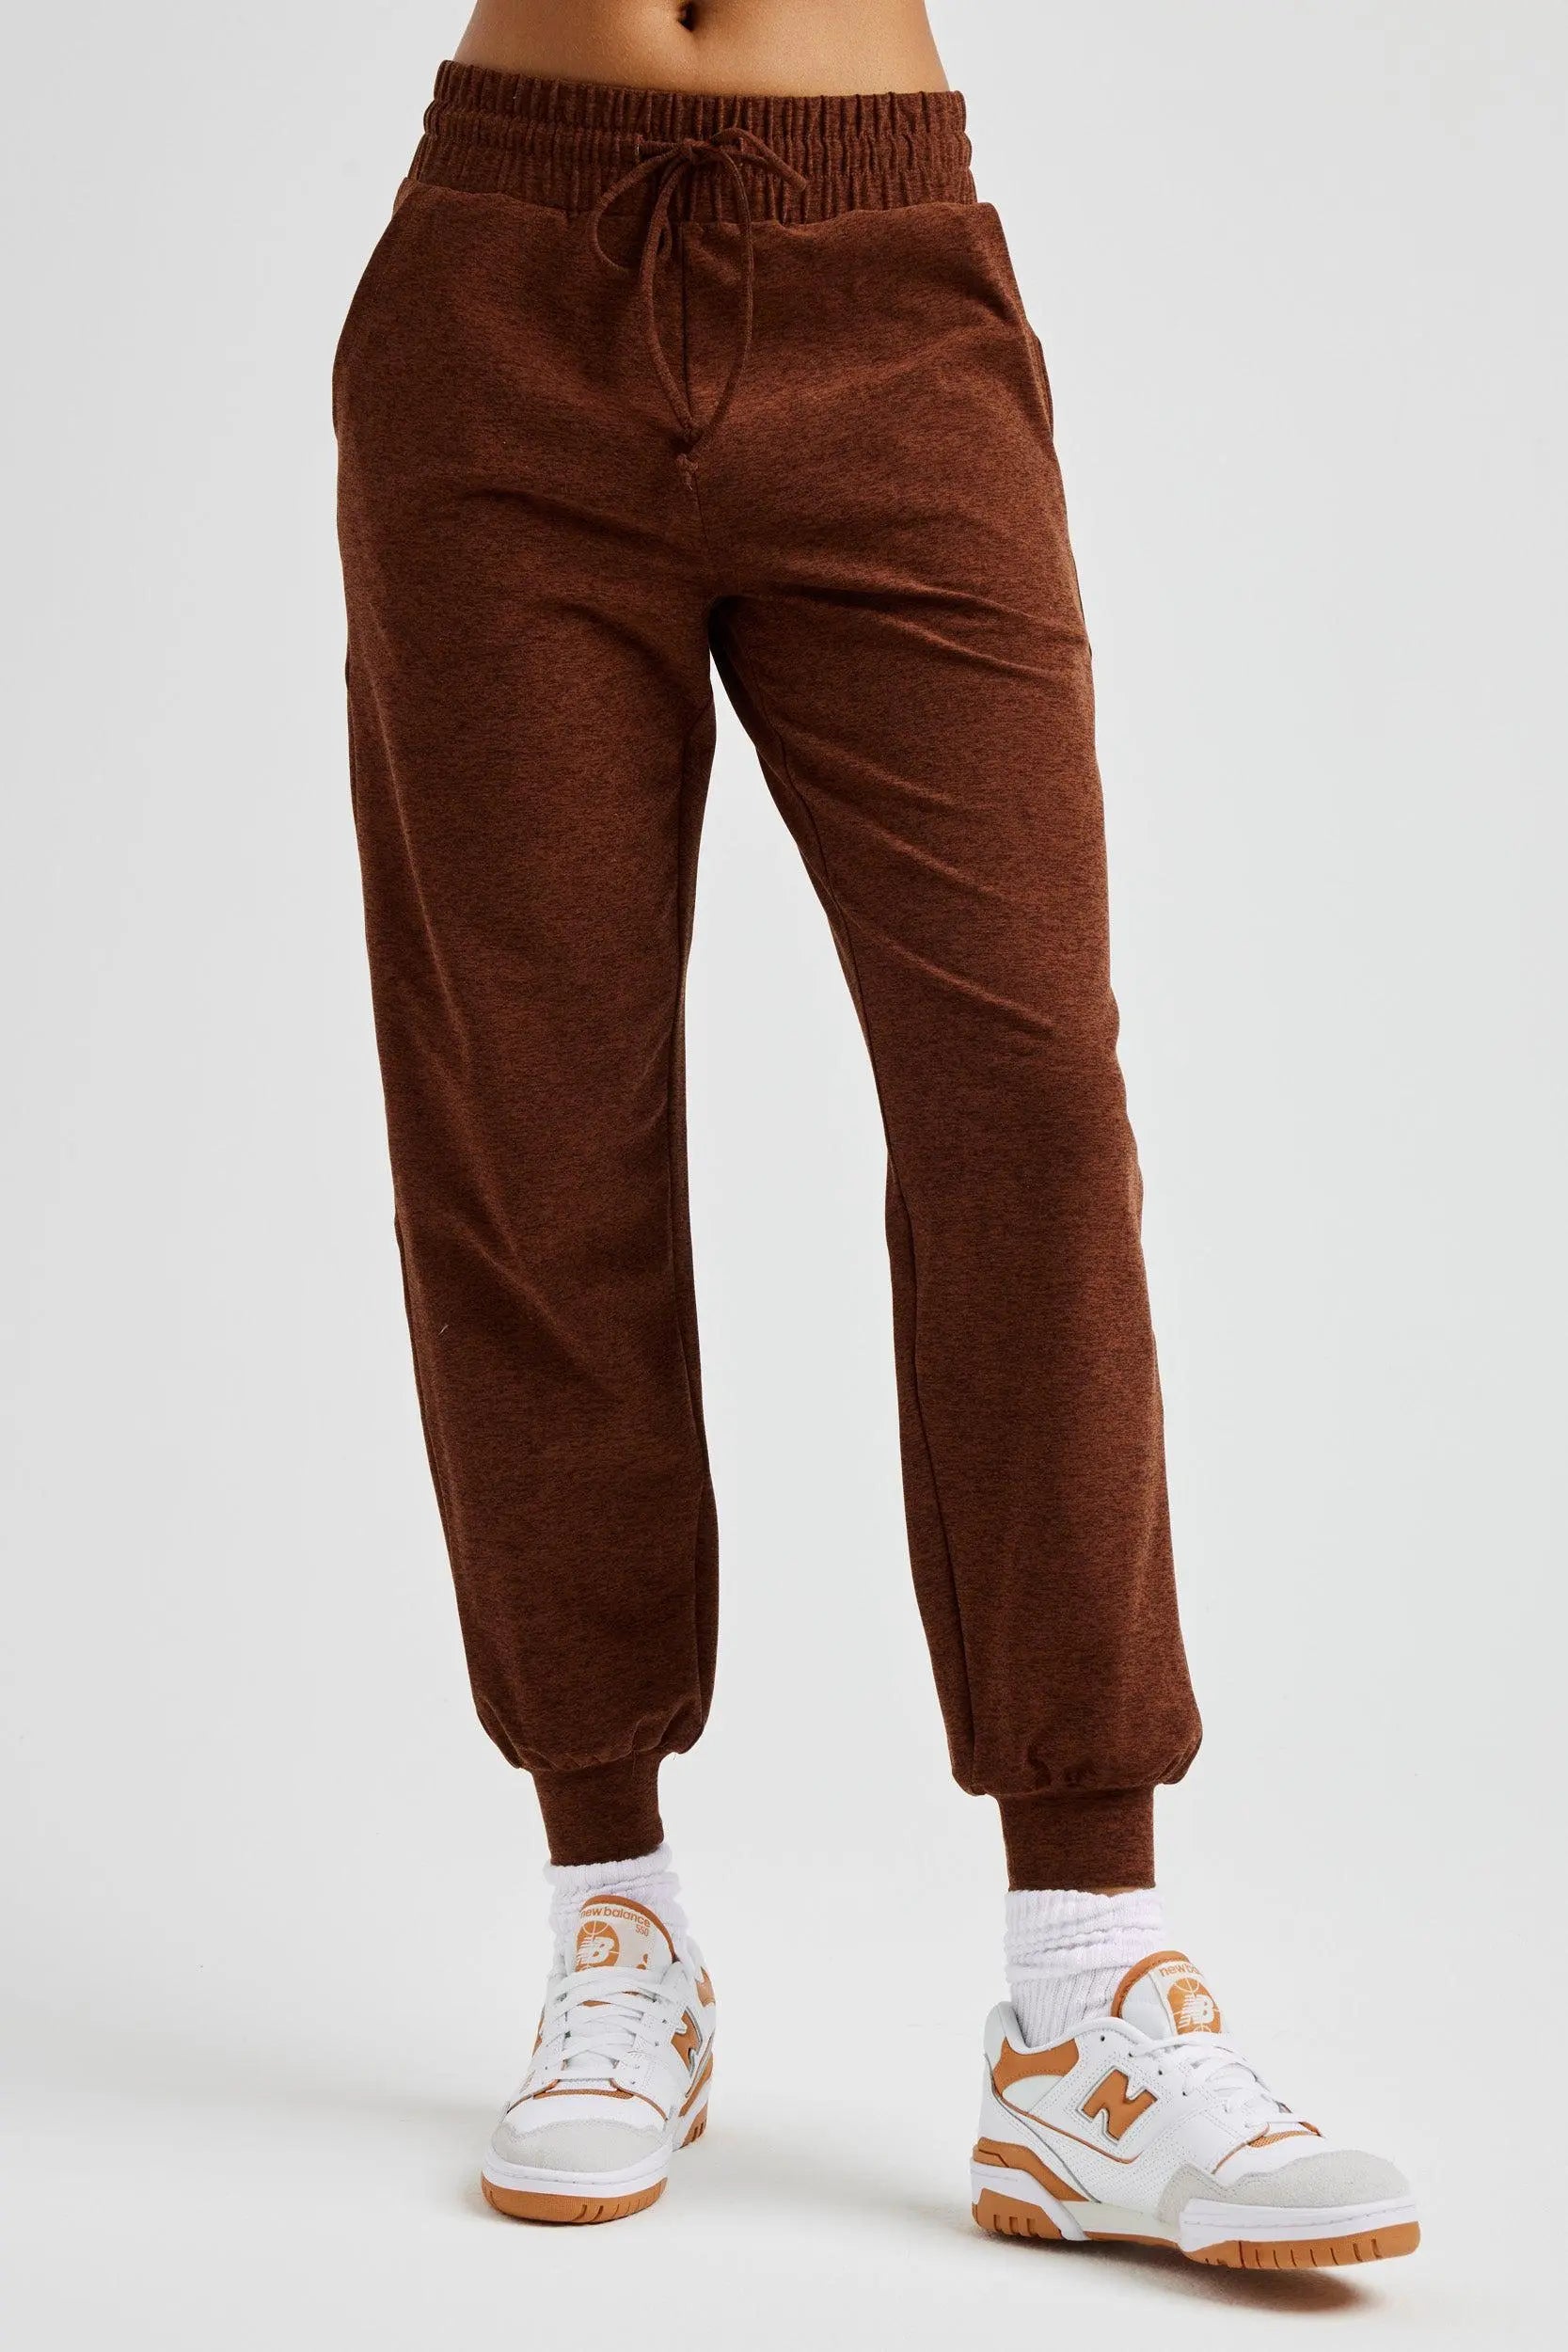 The L.A.X. Jogger Year of Ours Sweatpant